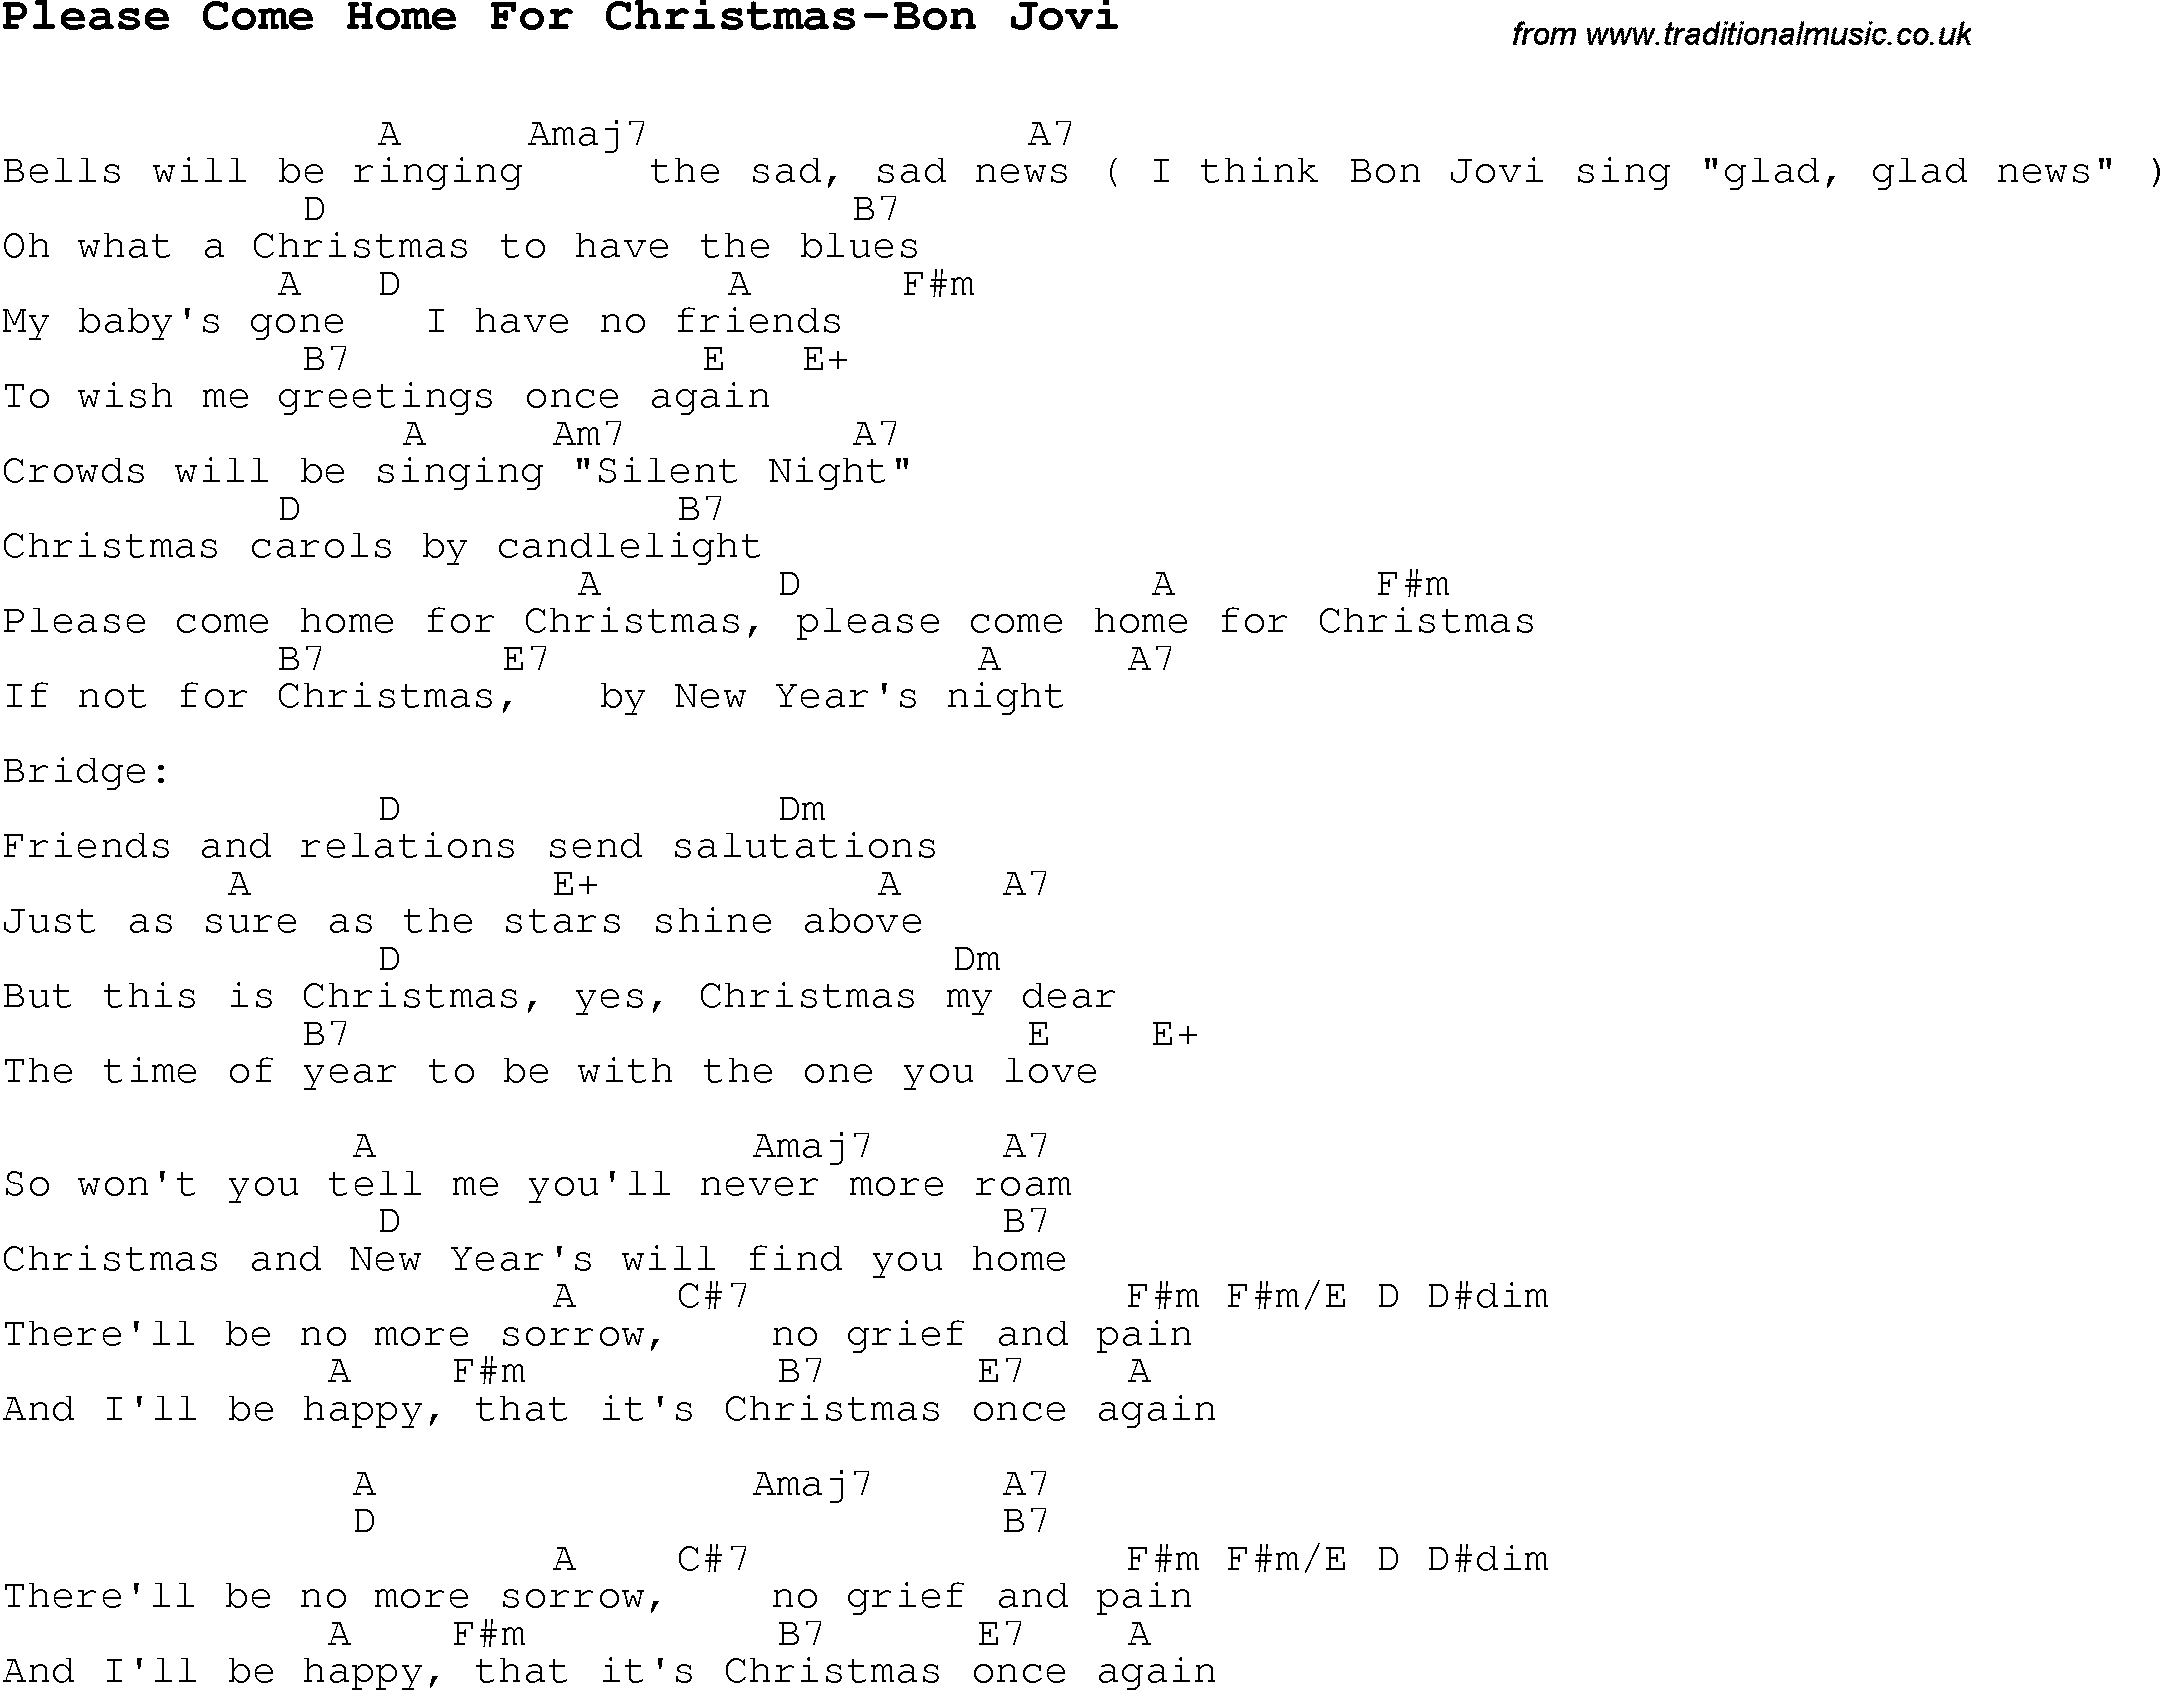 Christmas Songs and Carols lyrics with chords for guitar banjo for Please e Home For